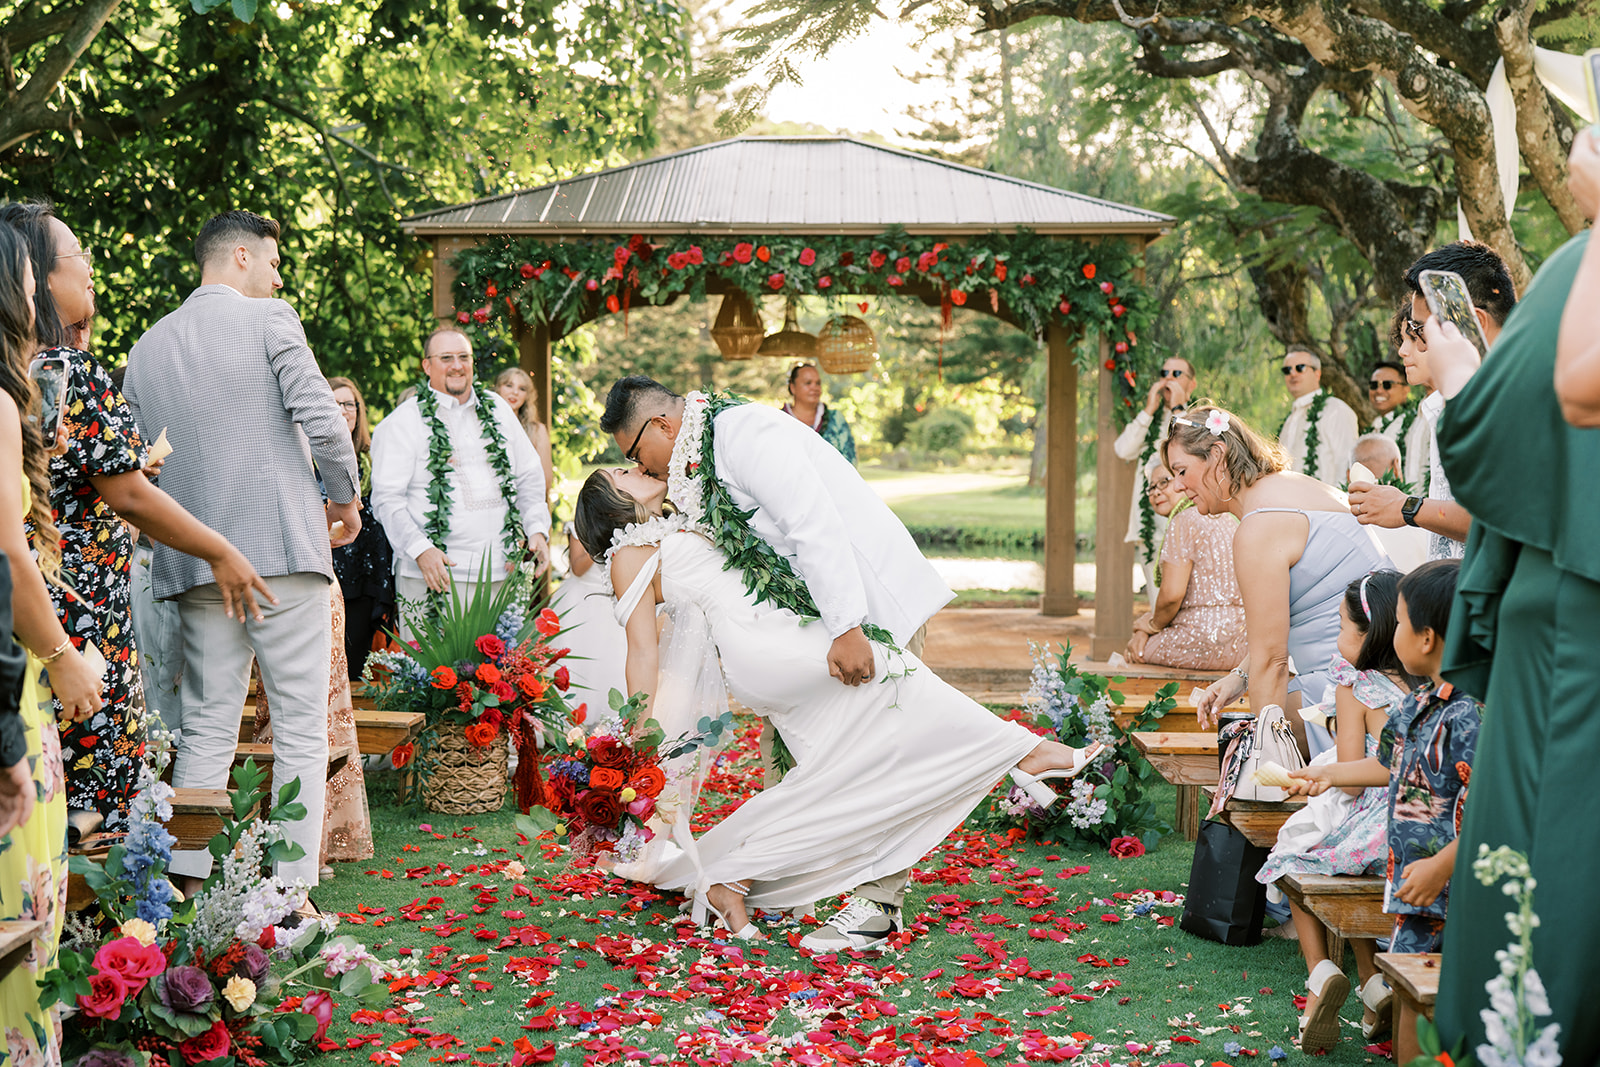 A couple at their outdoor wedding ceremony sharing a kiss with guests lined up along a flower-strewn aisle.